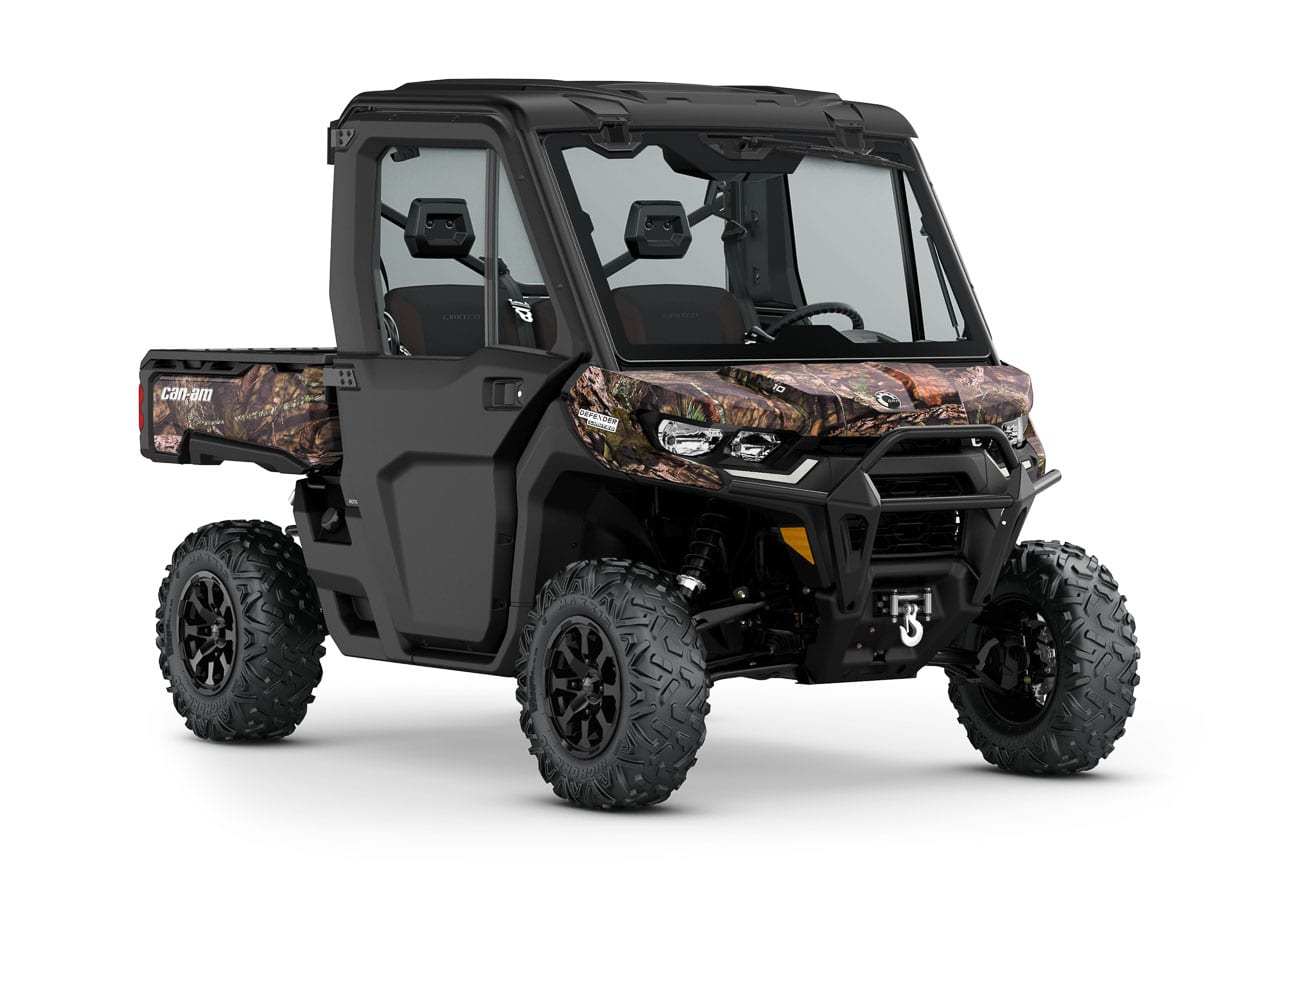 New Lineup of 2020 Can-Am Defender Side-by-Side Vehicles